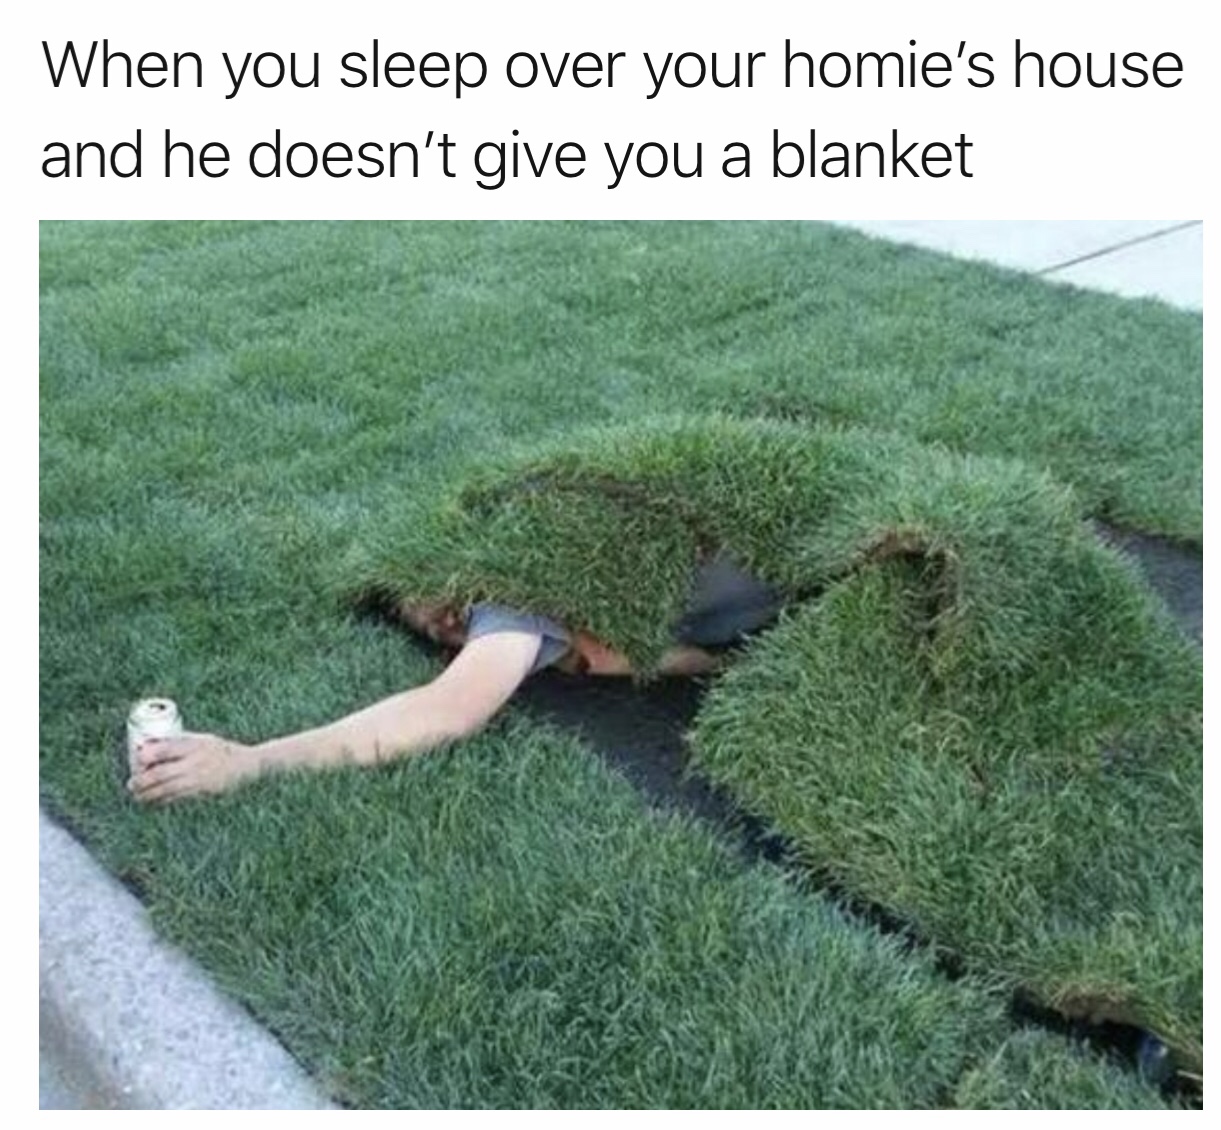 drunk under lawn - When you sleep over your homie's house and he doesn't give you a blanket